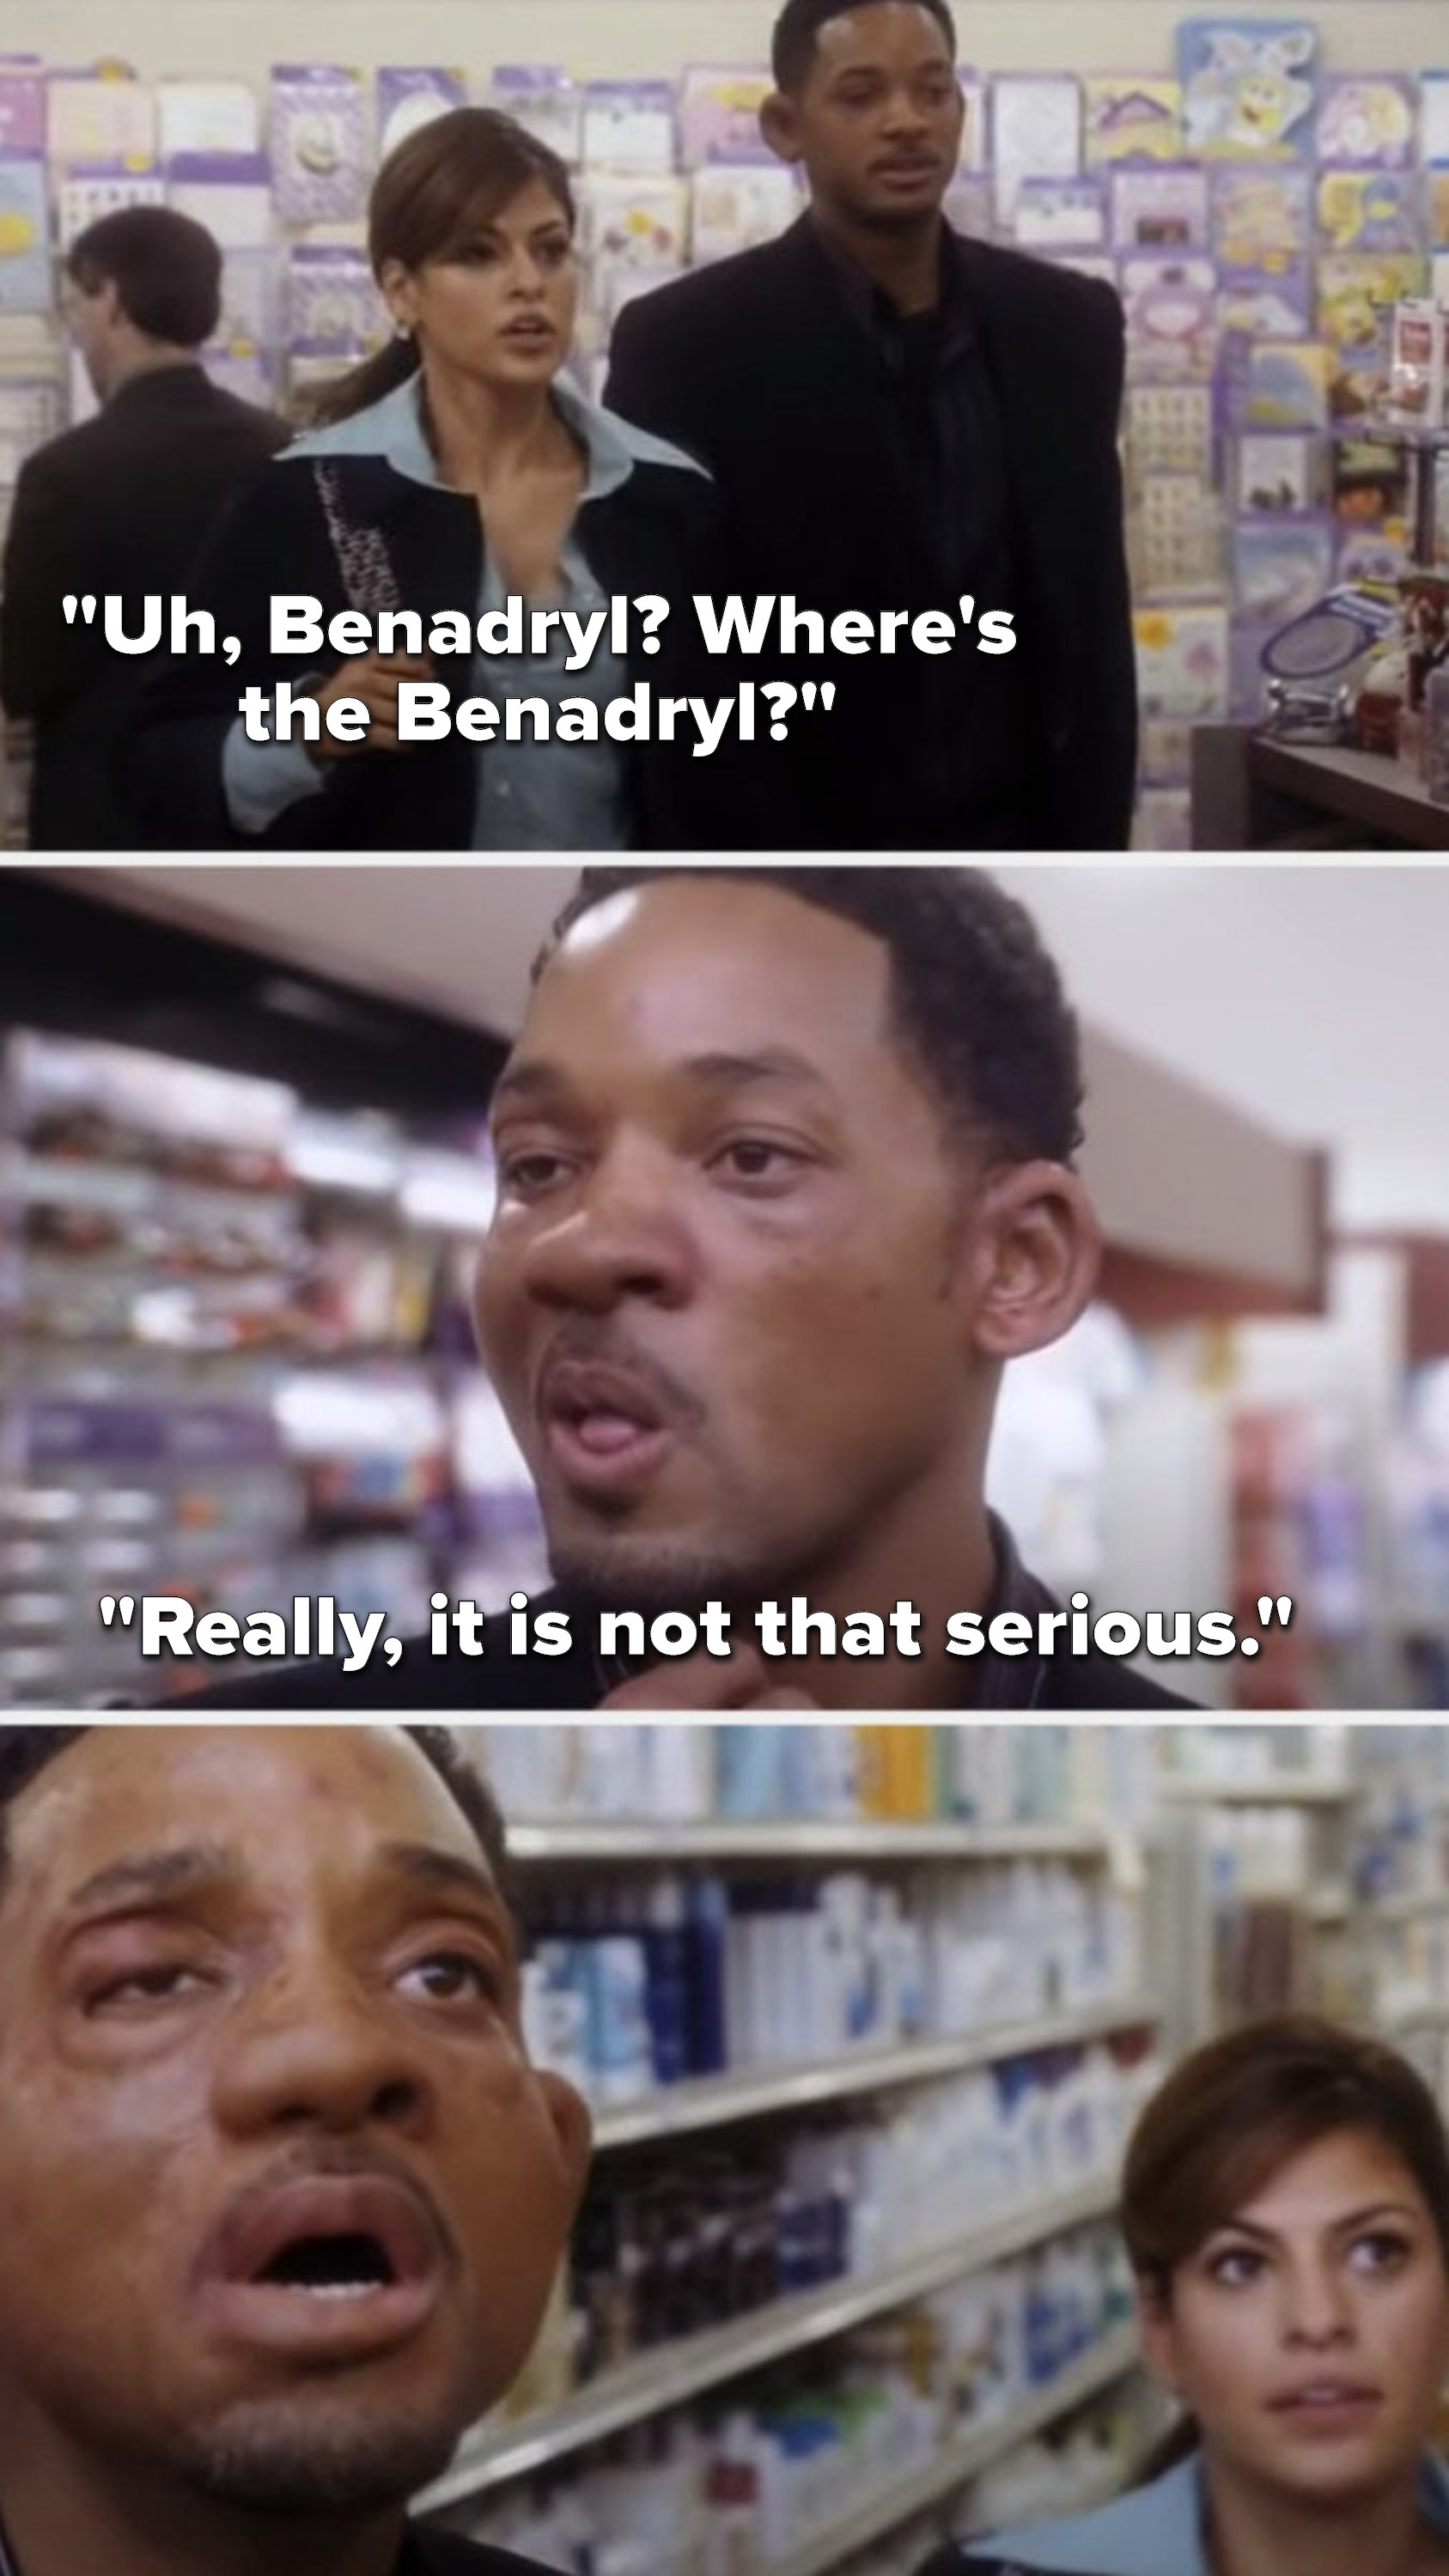 In a pharmacy, Sara says, &quot;Uh, Benadryl, where&#x27;s the Benadryl,&quot; and while his face swells up so much, Hitch says, &quot;Really, it is not that serious&quot;